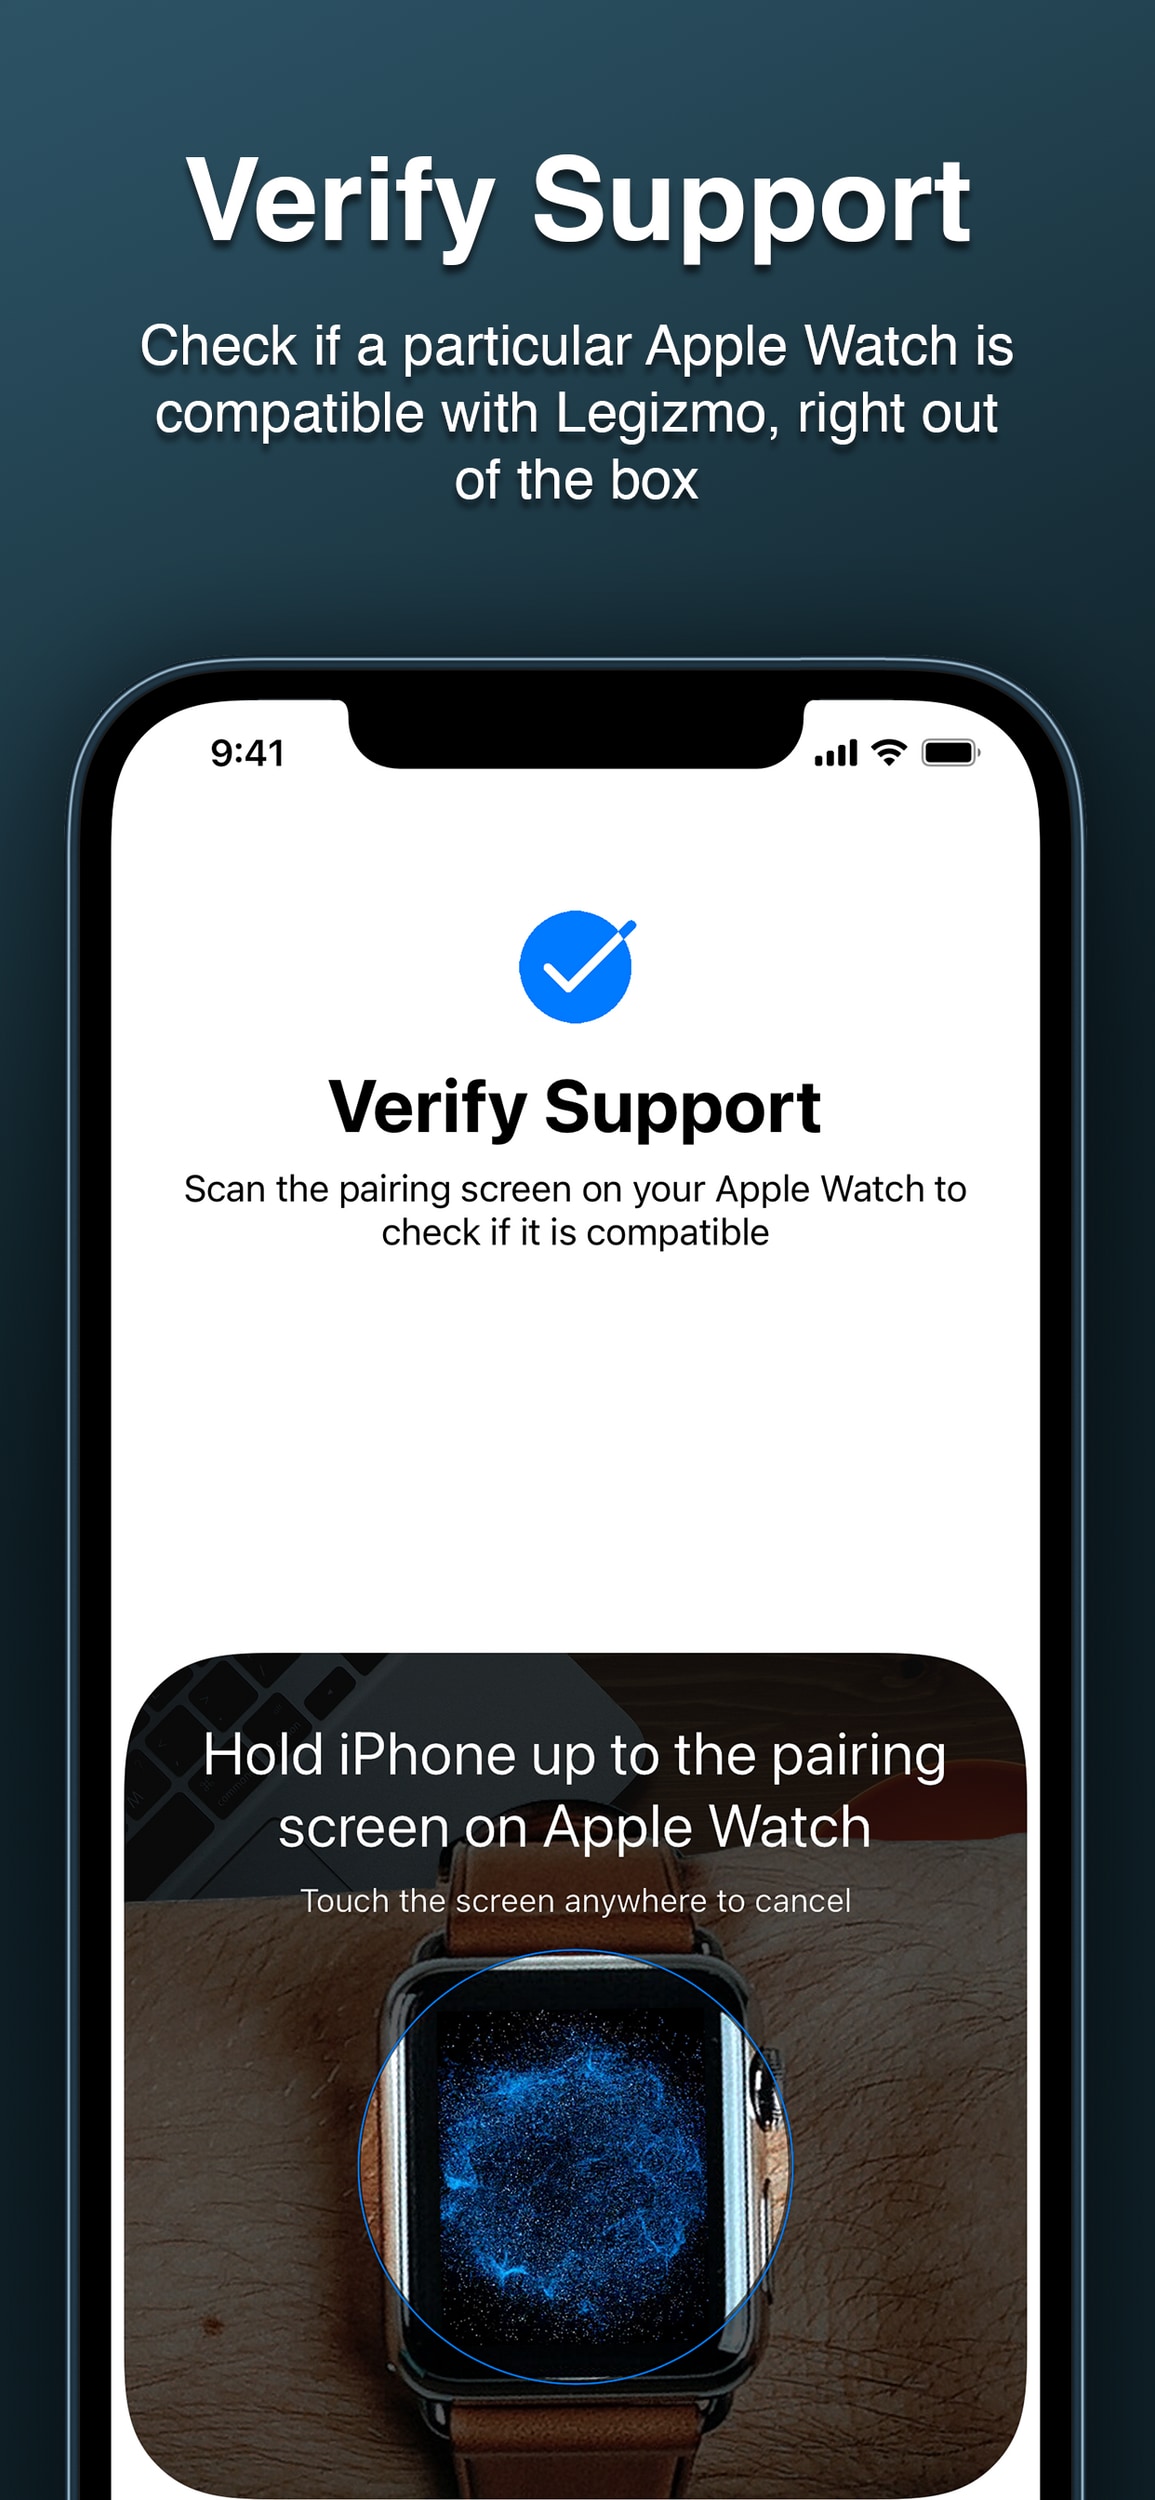 Legizmo's Verify Support screen, showing an Apple Watch on a person's wrist being scanned by Legizmo to check compatibility